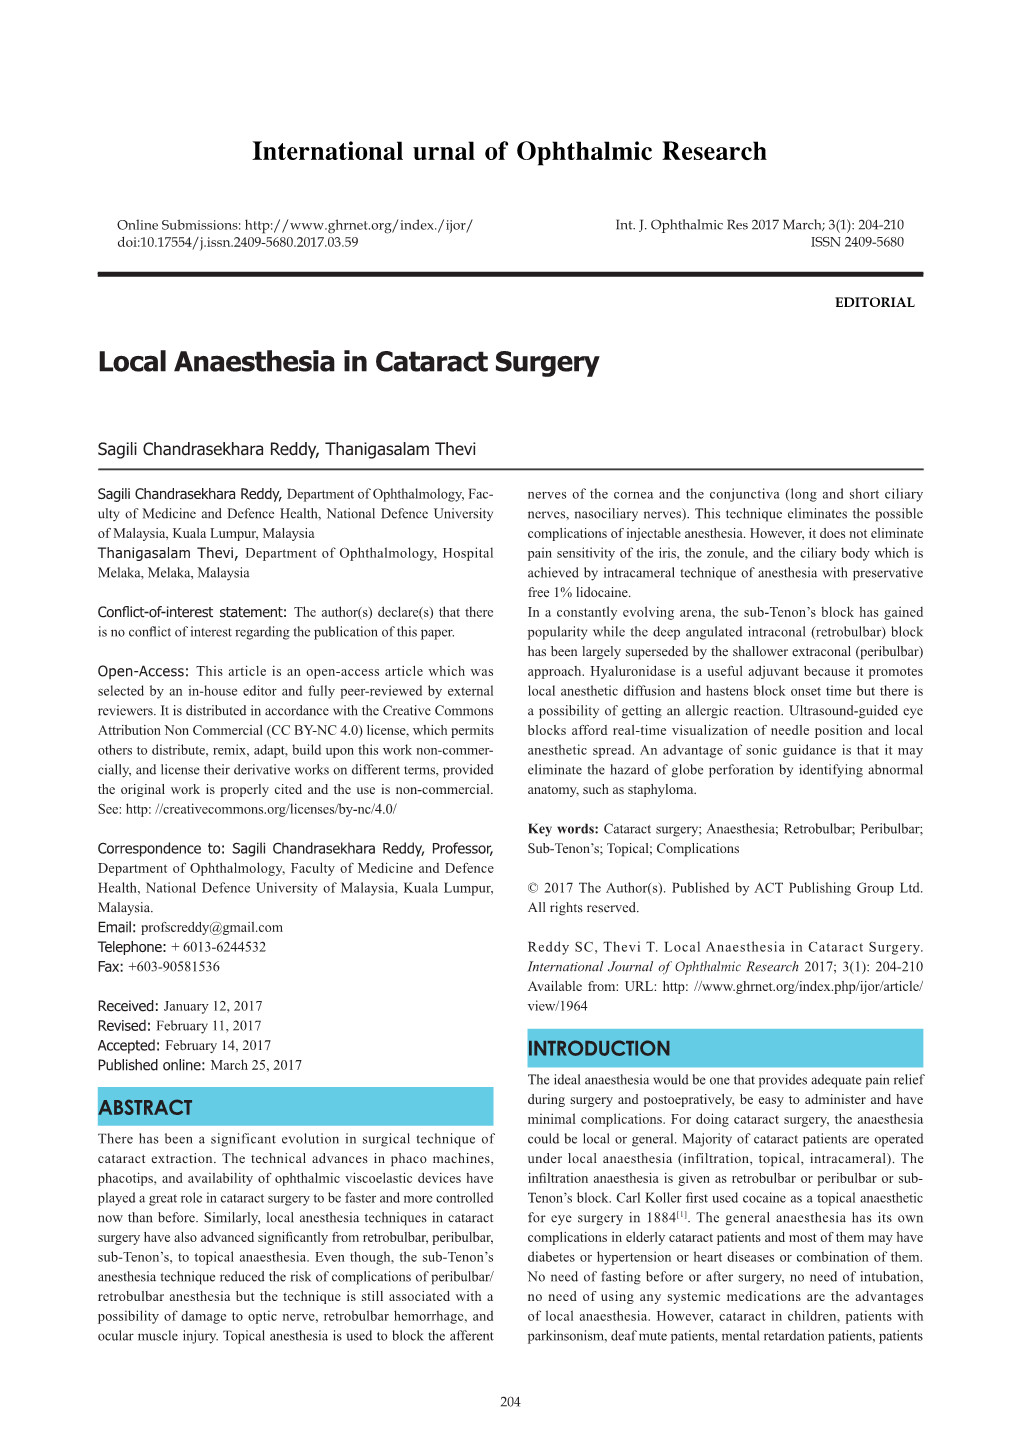 Local Anaesthesia in Cataract Surgery